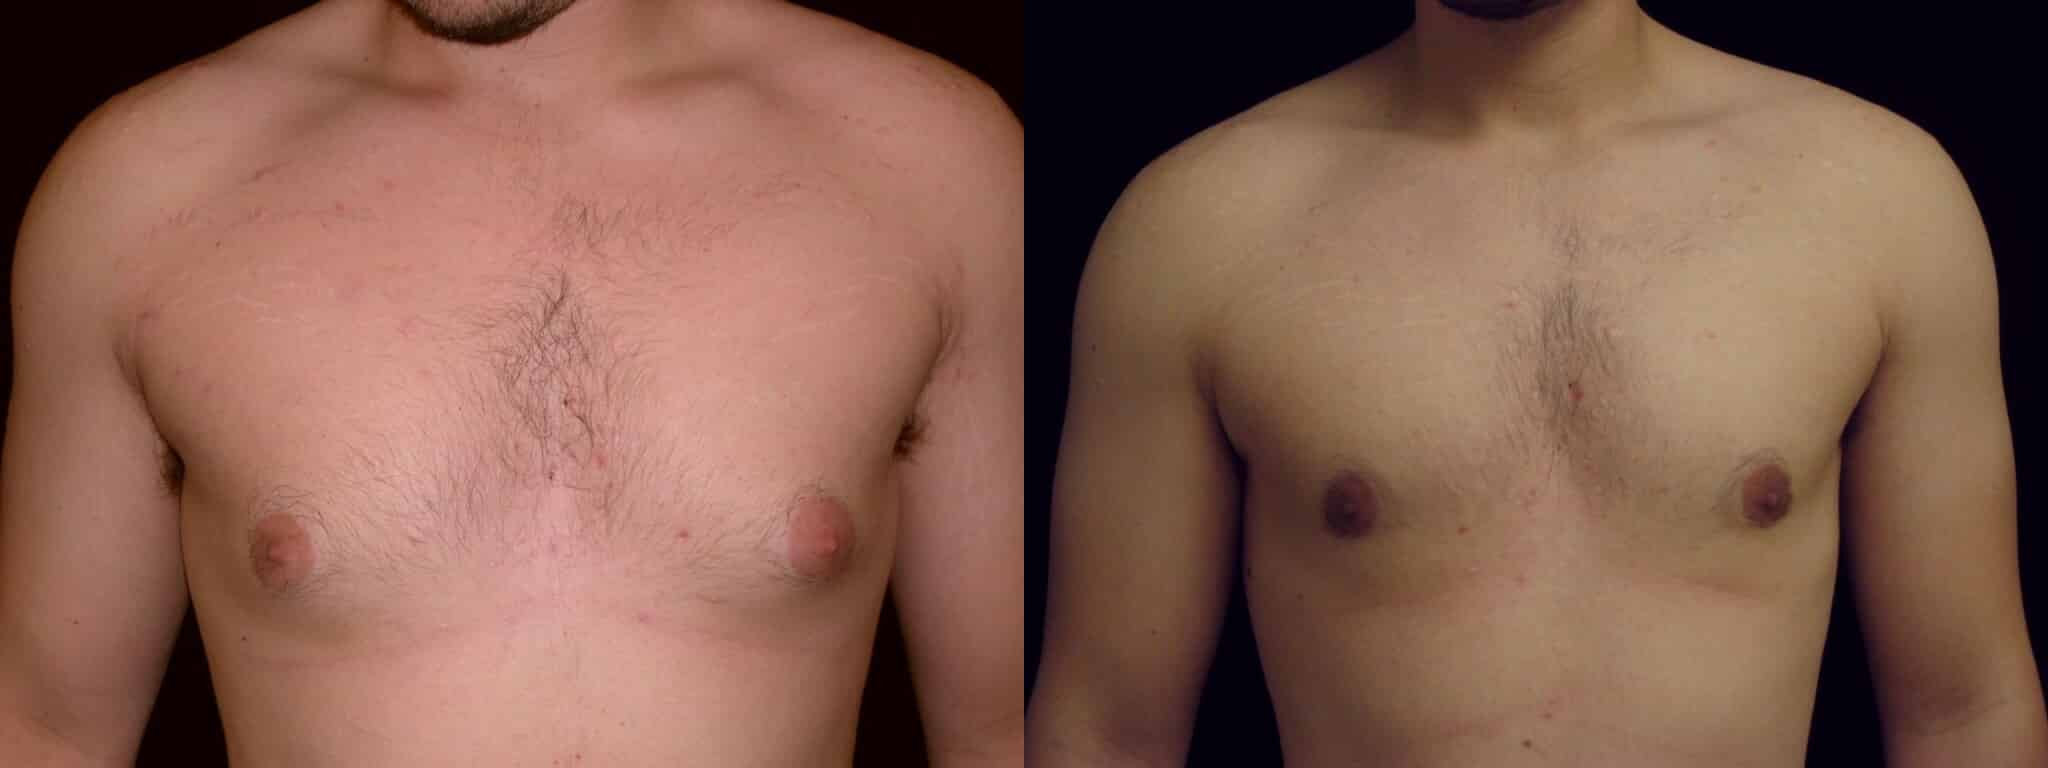 Gynecomastia Patient 13 Before & After